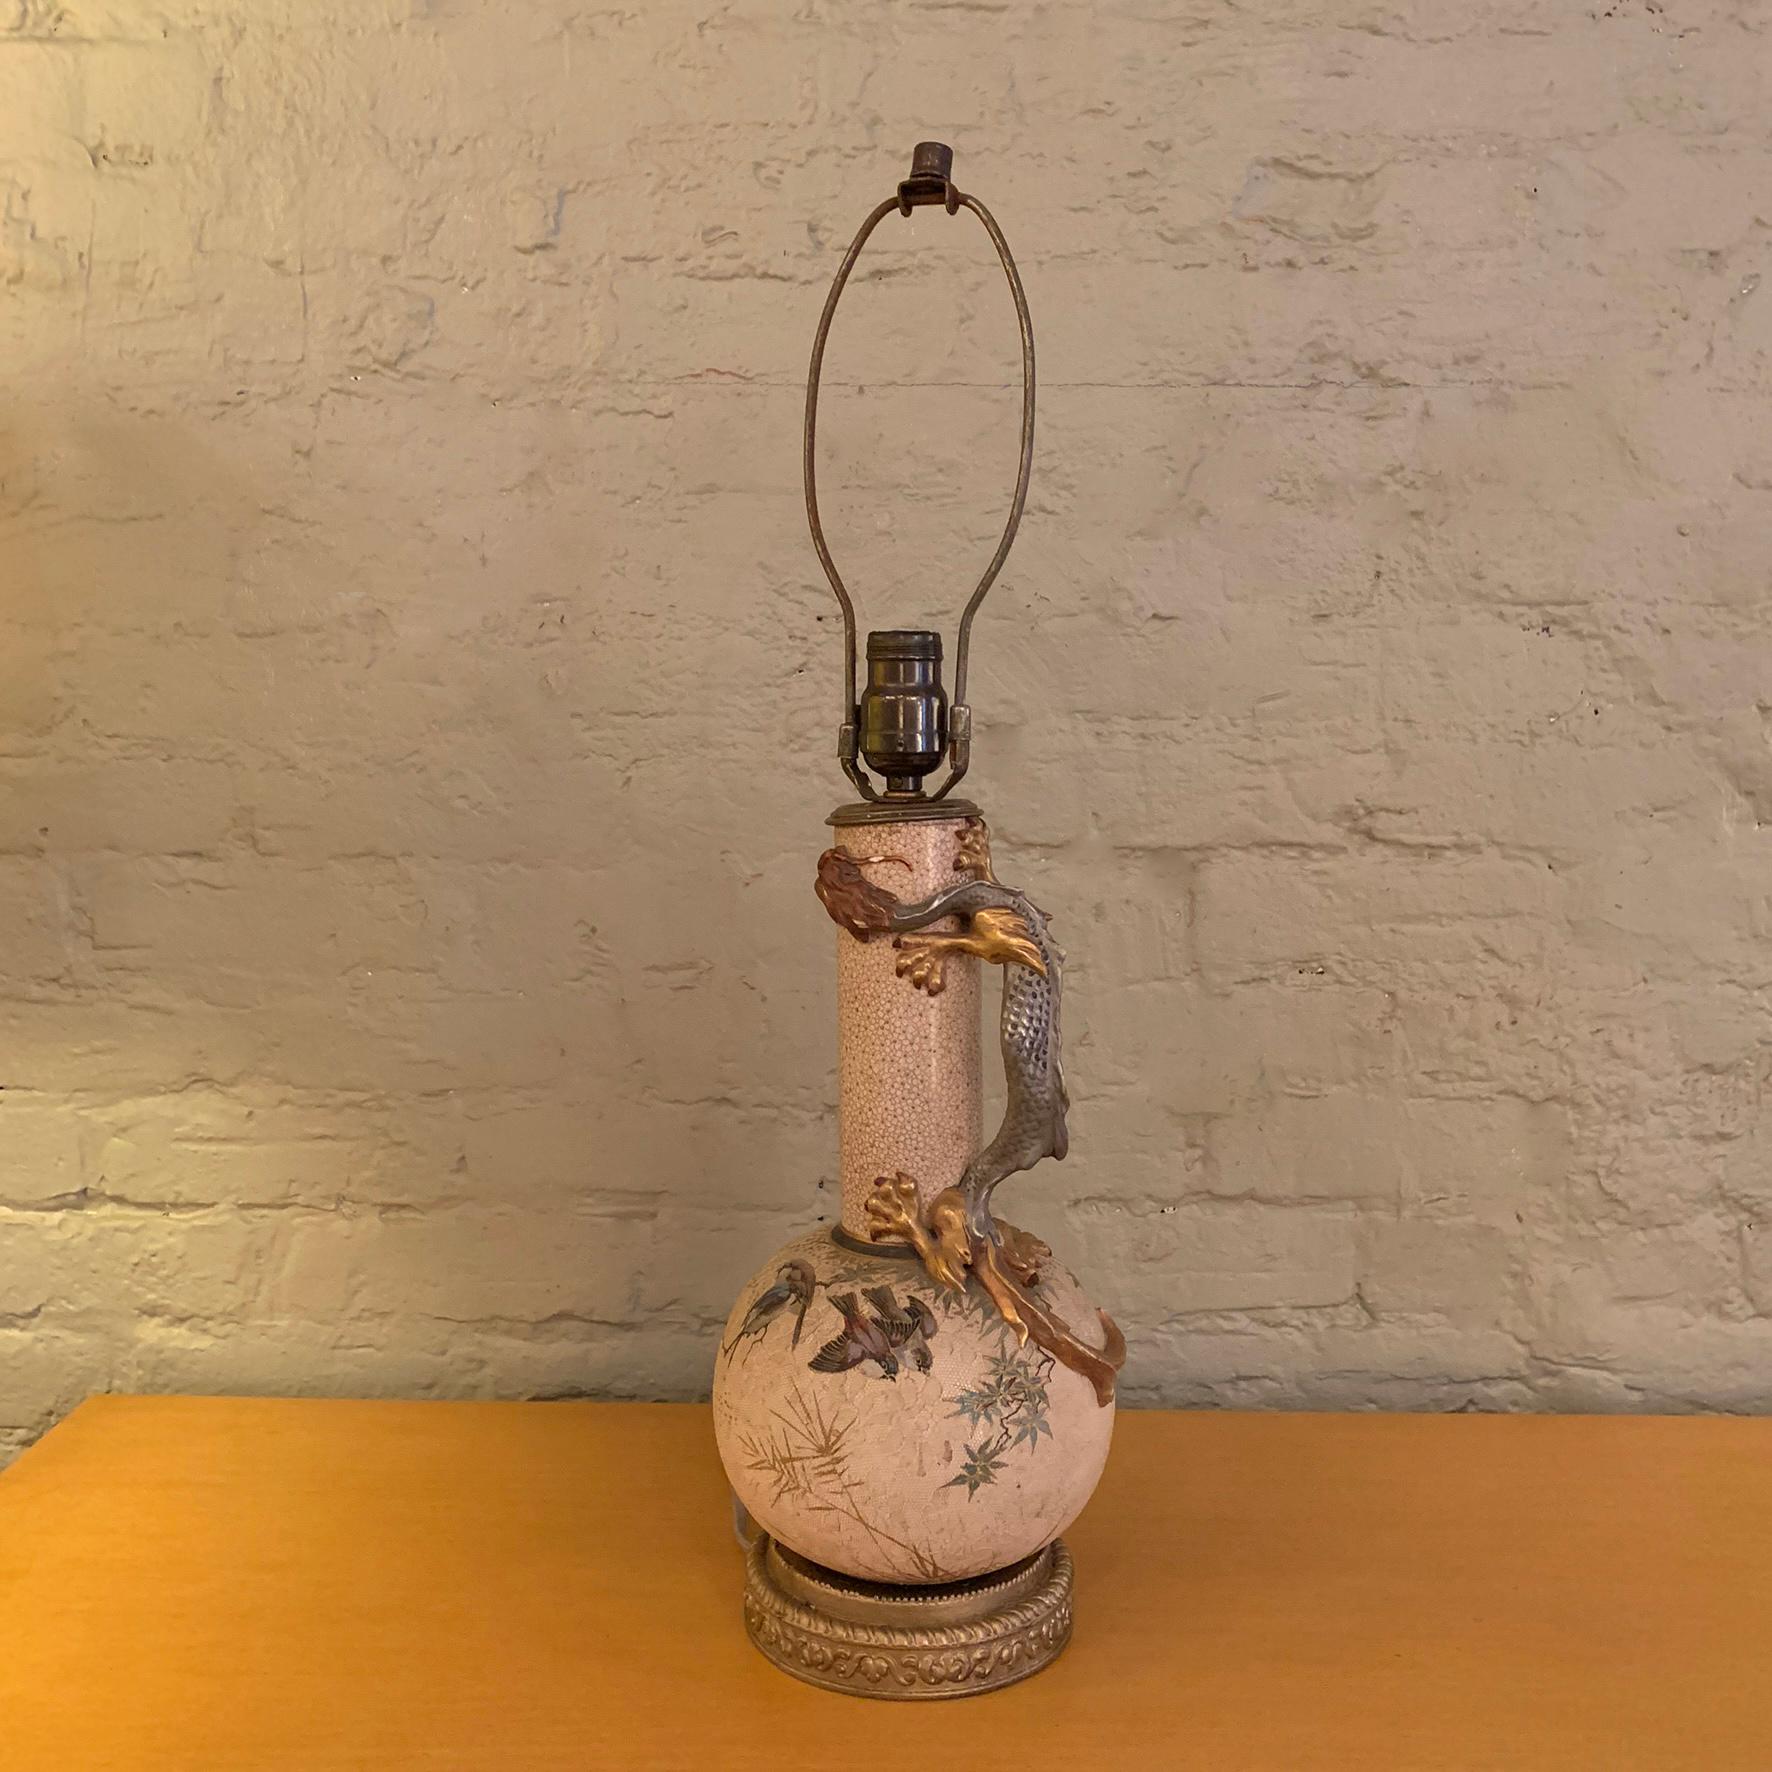 Midcentury, chinoiserie, plaster, table lamp depicting a dragon figure winding up it's faux marble textured stem, resting on it's lace textured, orb base. The height to the top of the socket is 17 inches. The lamp is attributed to Royal Worcester. 